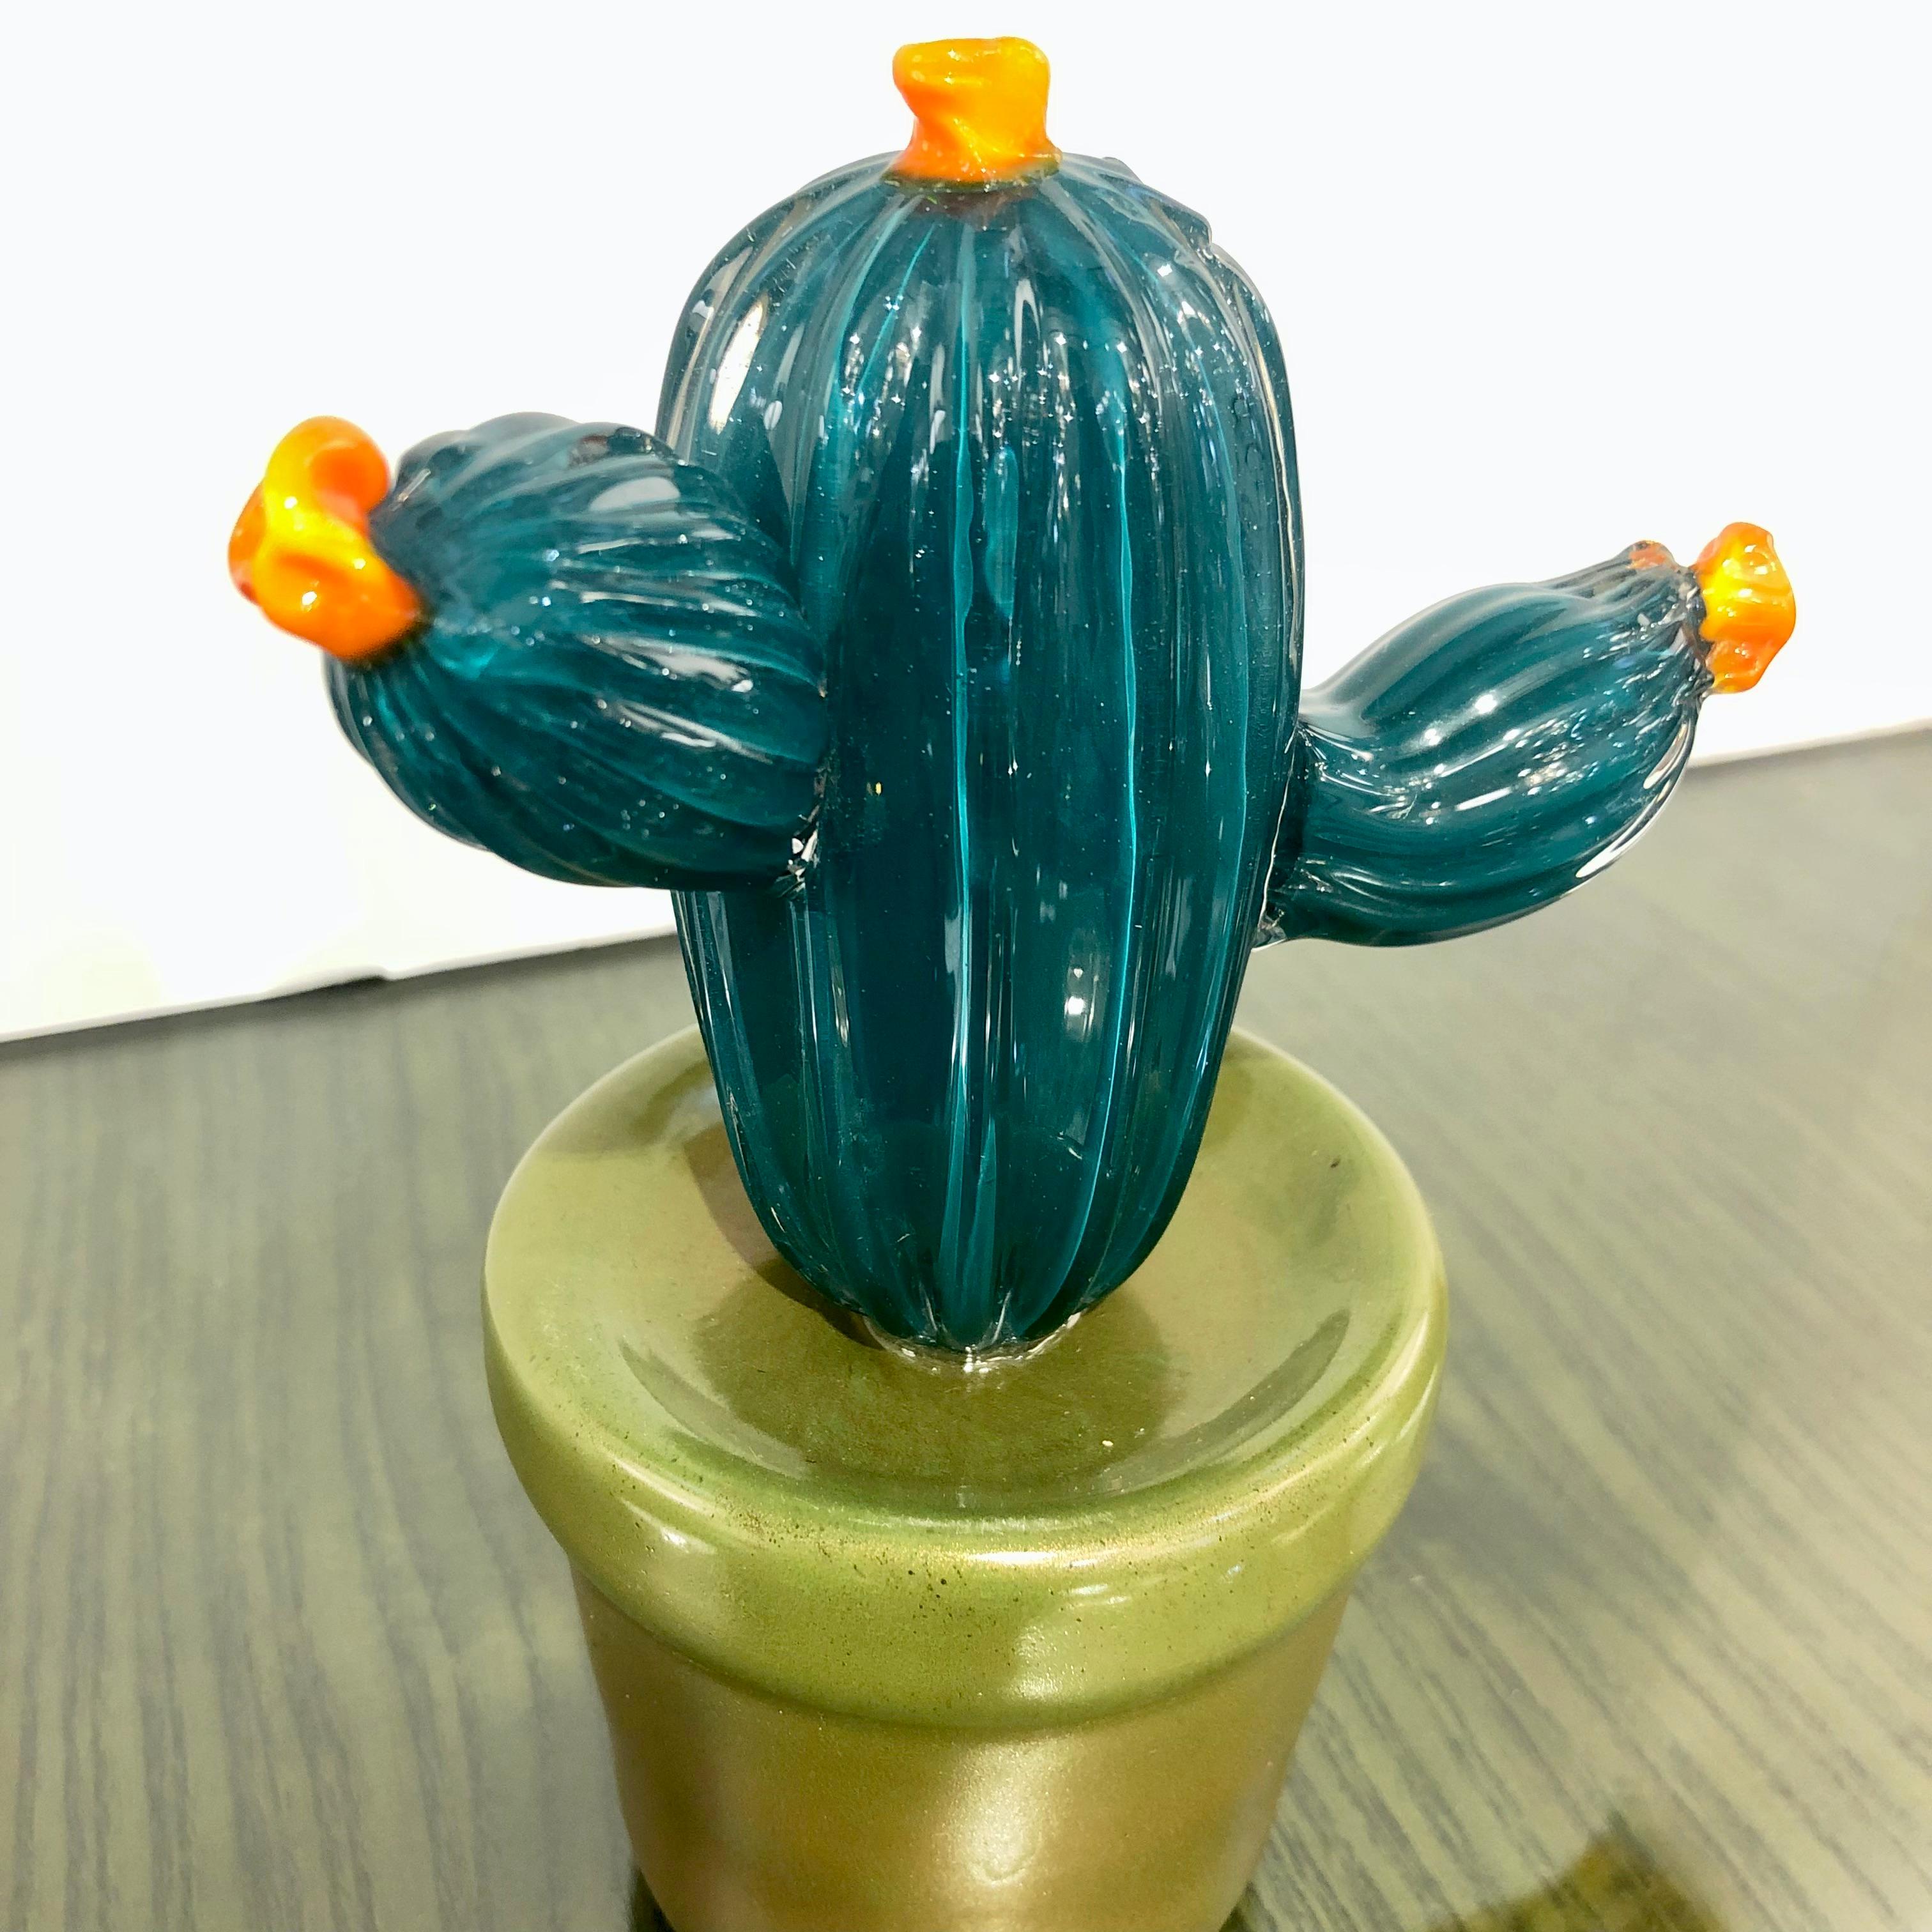 Organic Modern 2000s Italian Teal Green Gold Murano Art Glass Cactus Plant with Orange Flowers For Sale